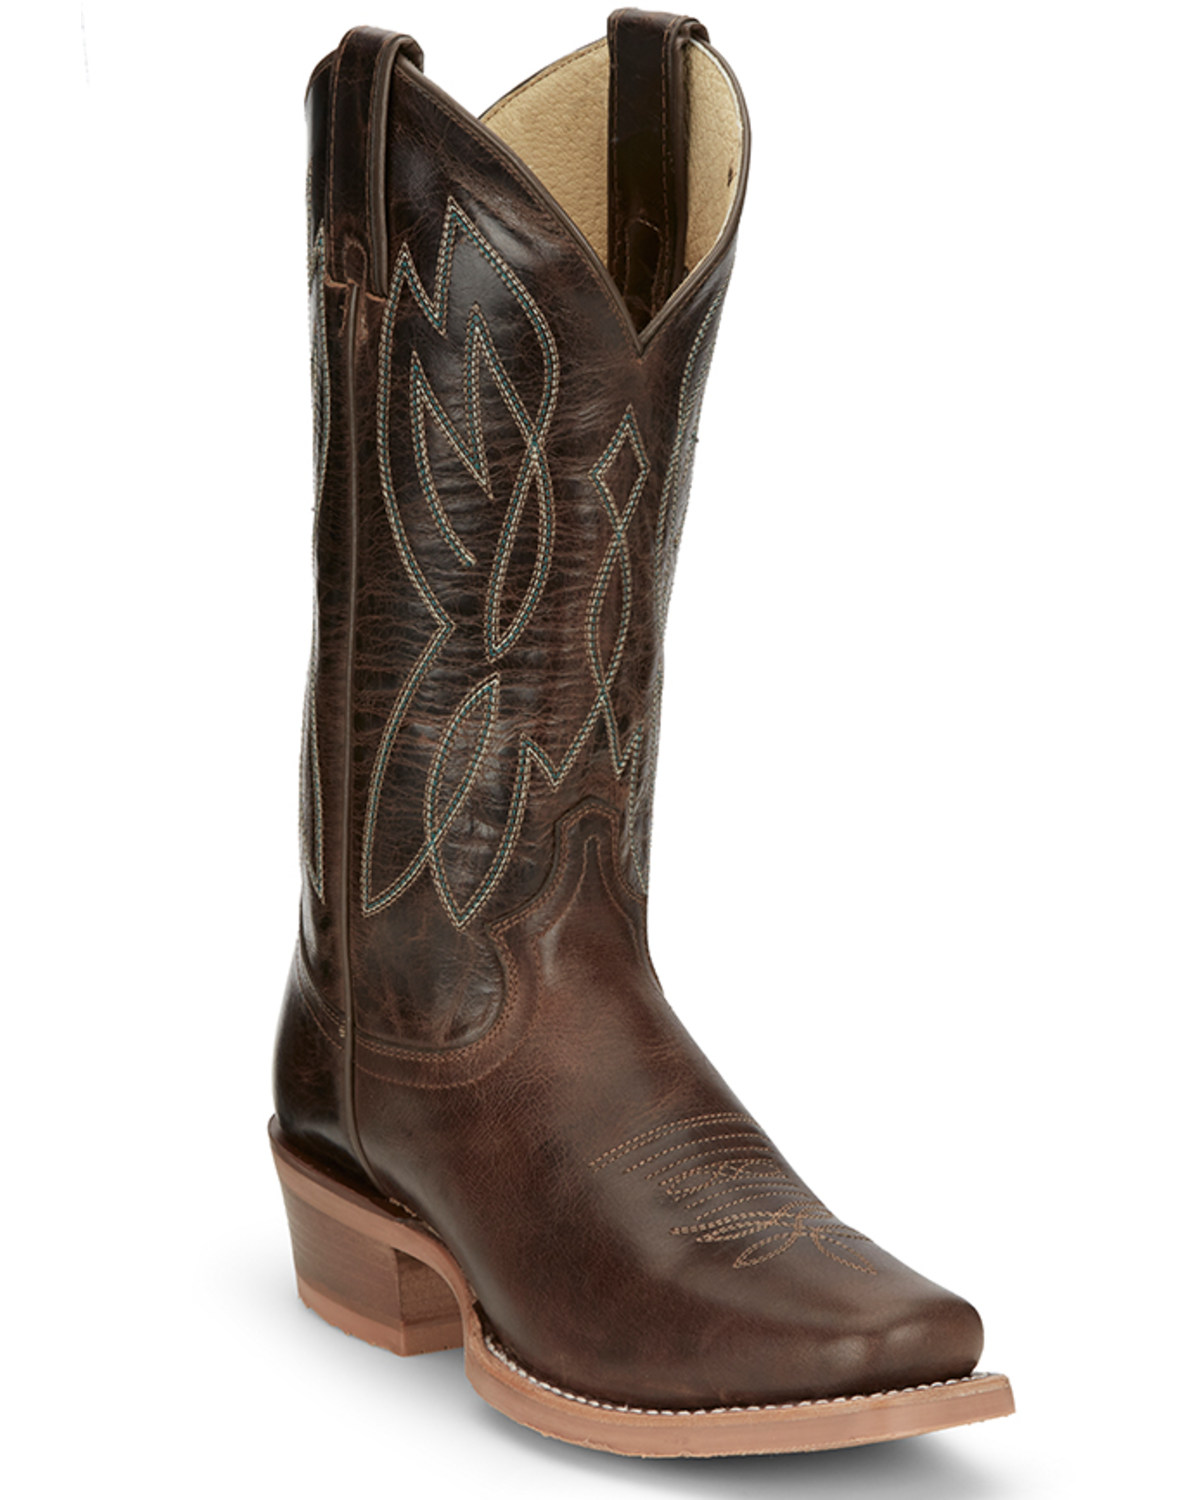 Justin Women's Mayberry Umber Western Boots - Square Toe